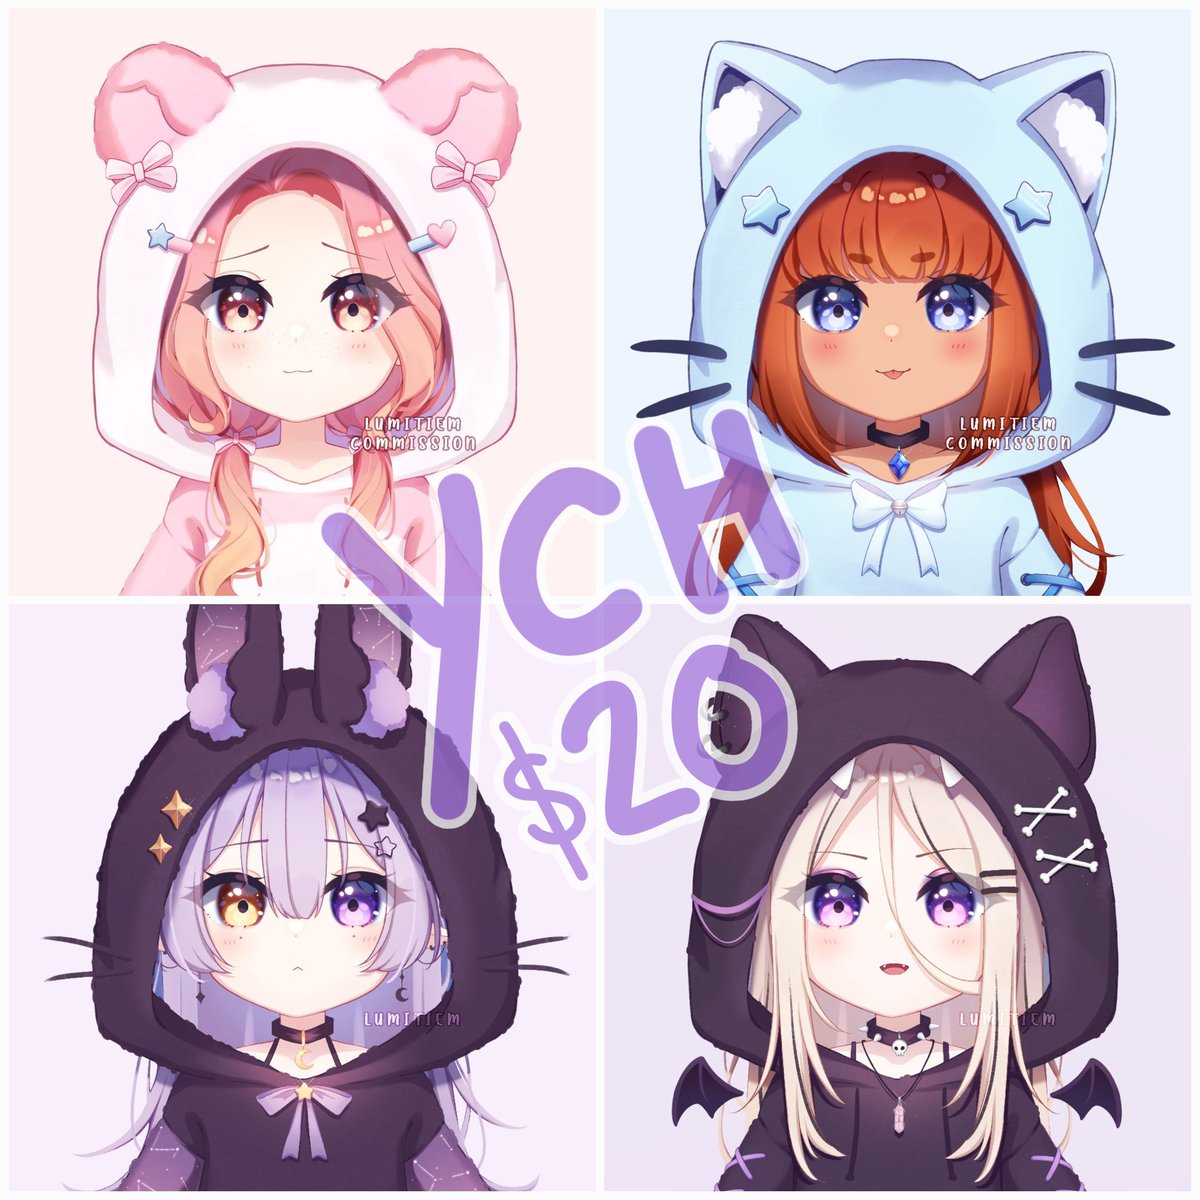 I have 5 YCH chibi icon slots open !!

You get to customize the hoodie to the character 🥺💜🌙✨️

‼️ More info ‼️
ko-fi.com/lumitiem

✧ ── ⋆⋅☆⋅⋆ ── ✧
#ych #ychcommission #koficommission #chibi #chibiart #vtuber #artistsontwitter #artmoots